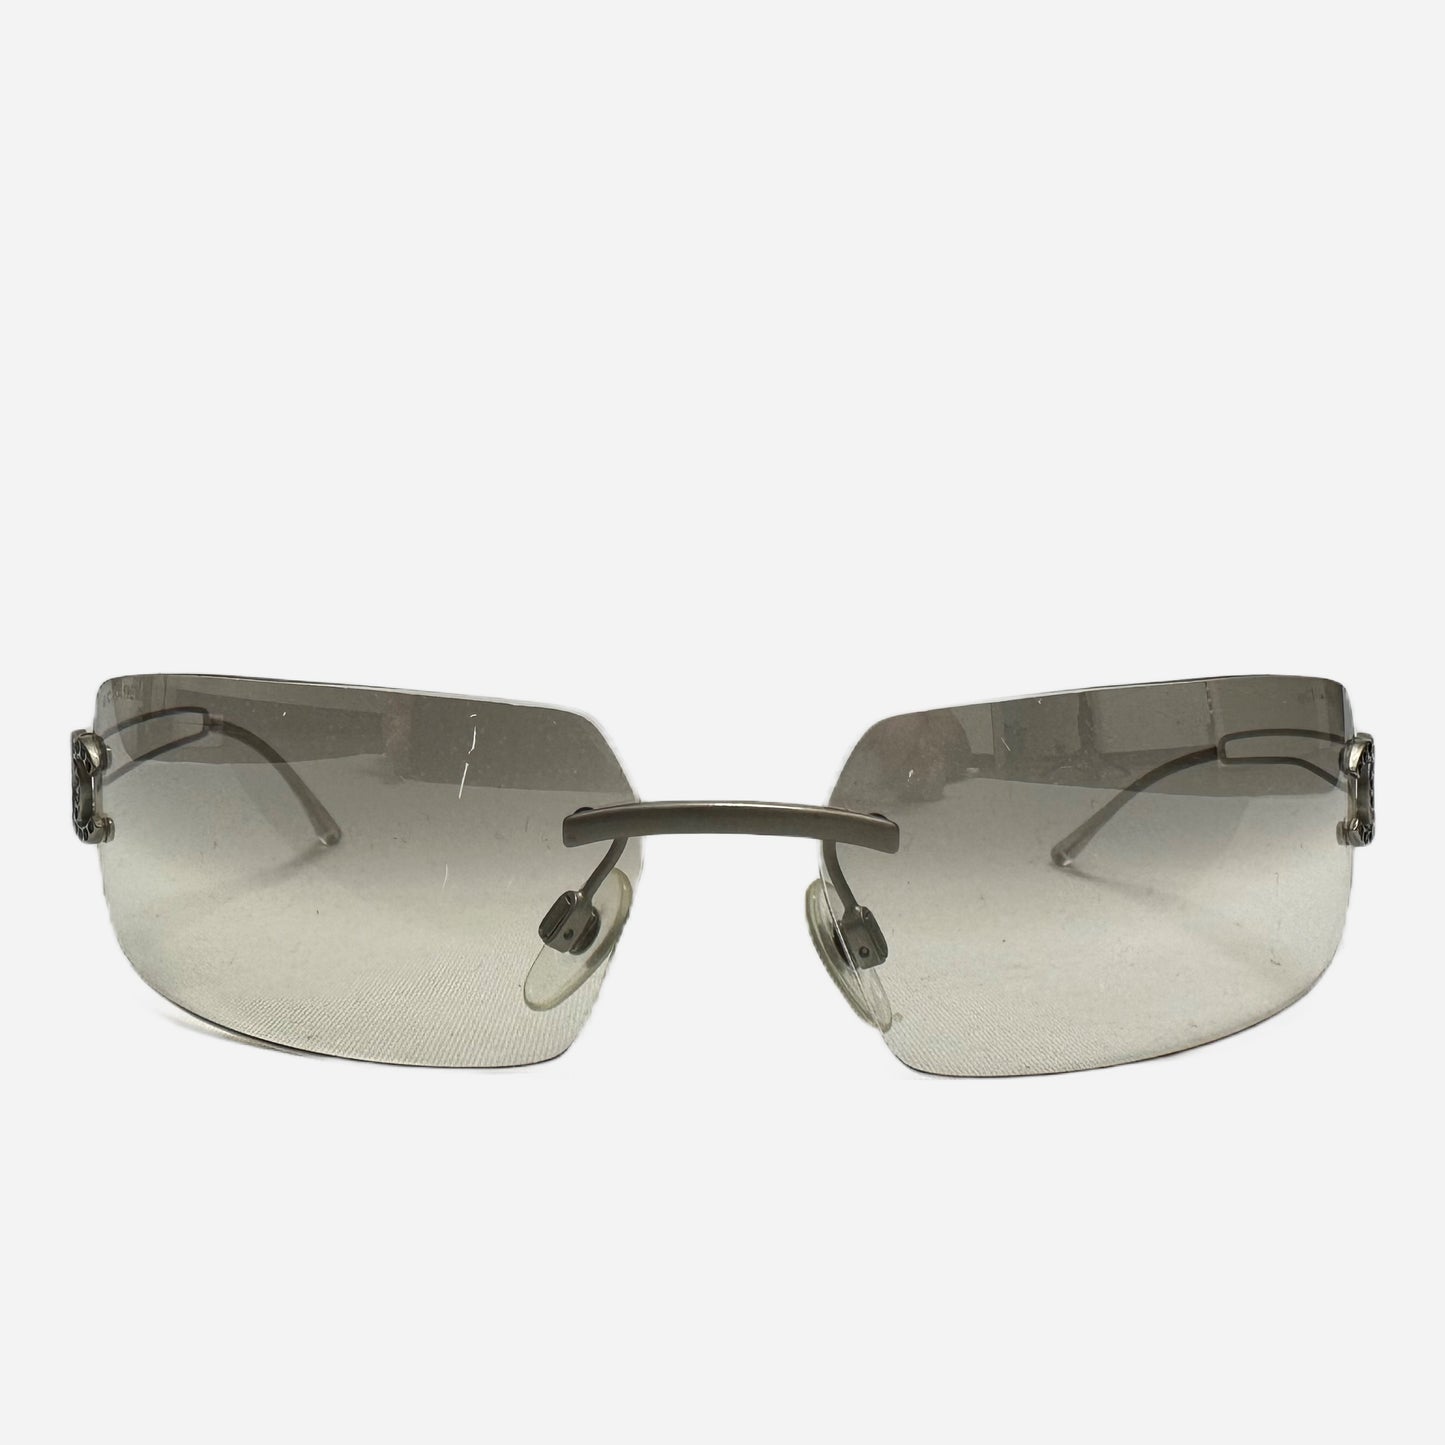 The-Seekers-Vintage-Coco-Chanel-Sunglasses-Sonnenbrille-4051